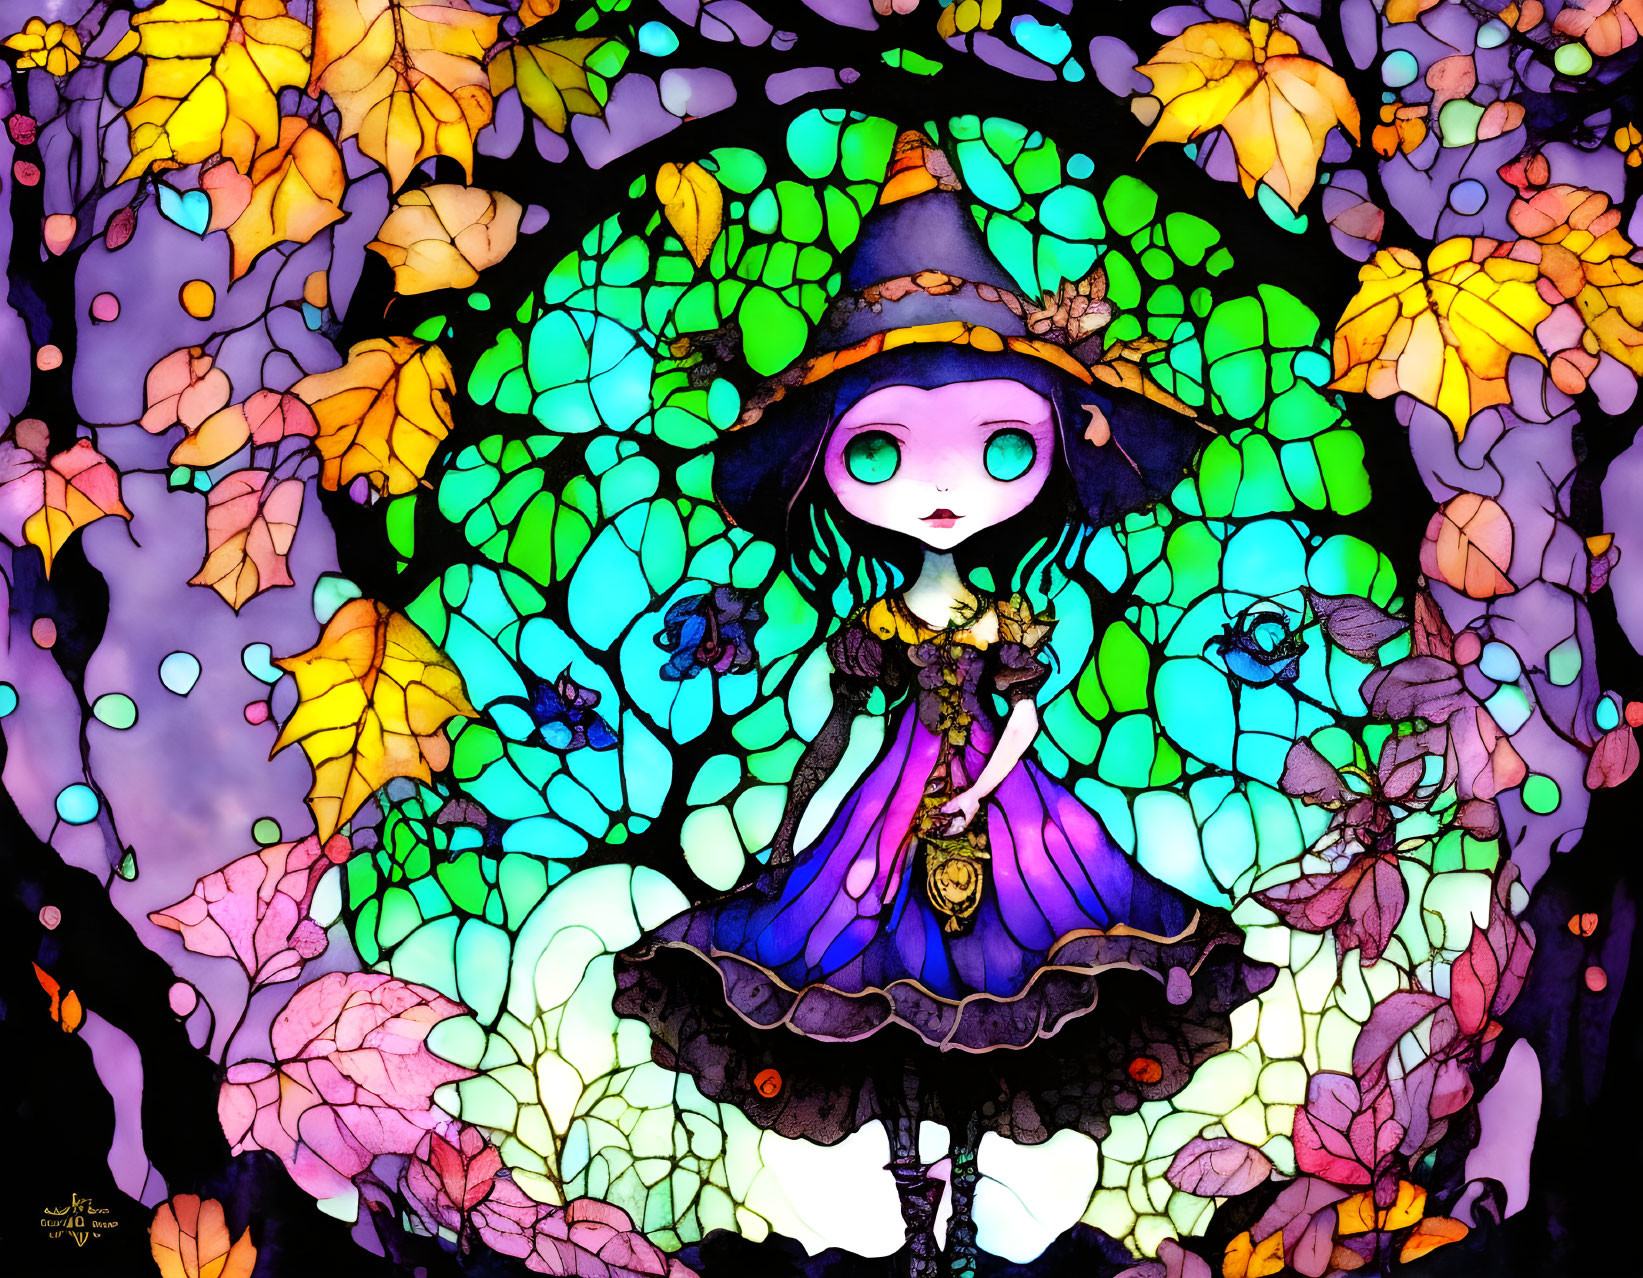 The Autumn witch